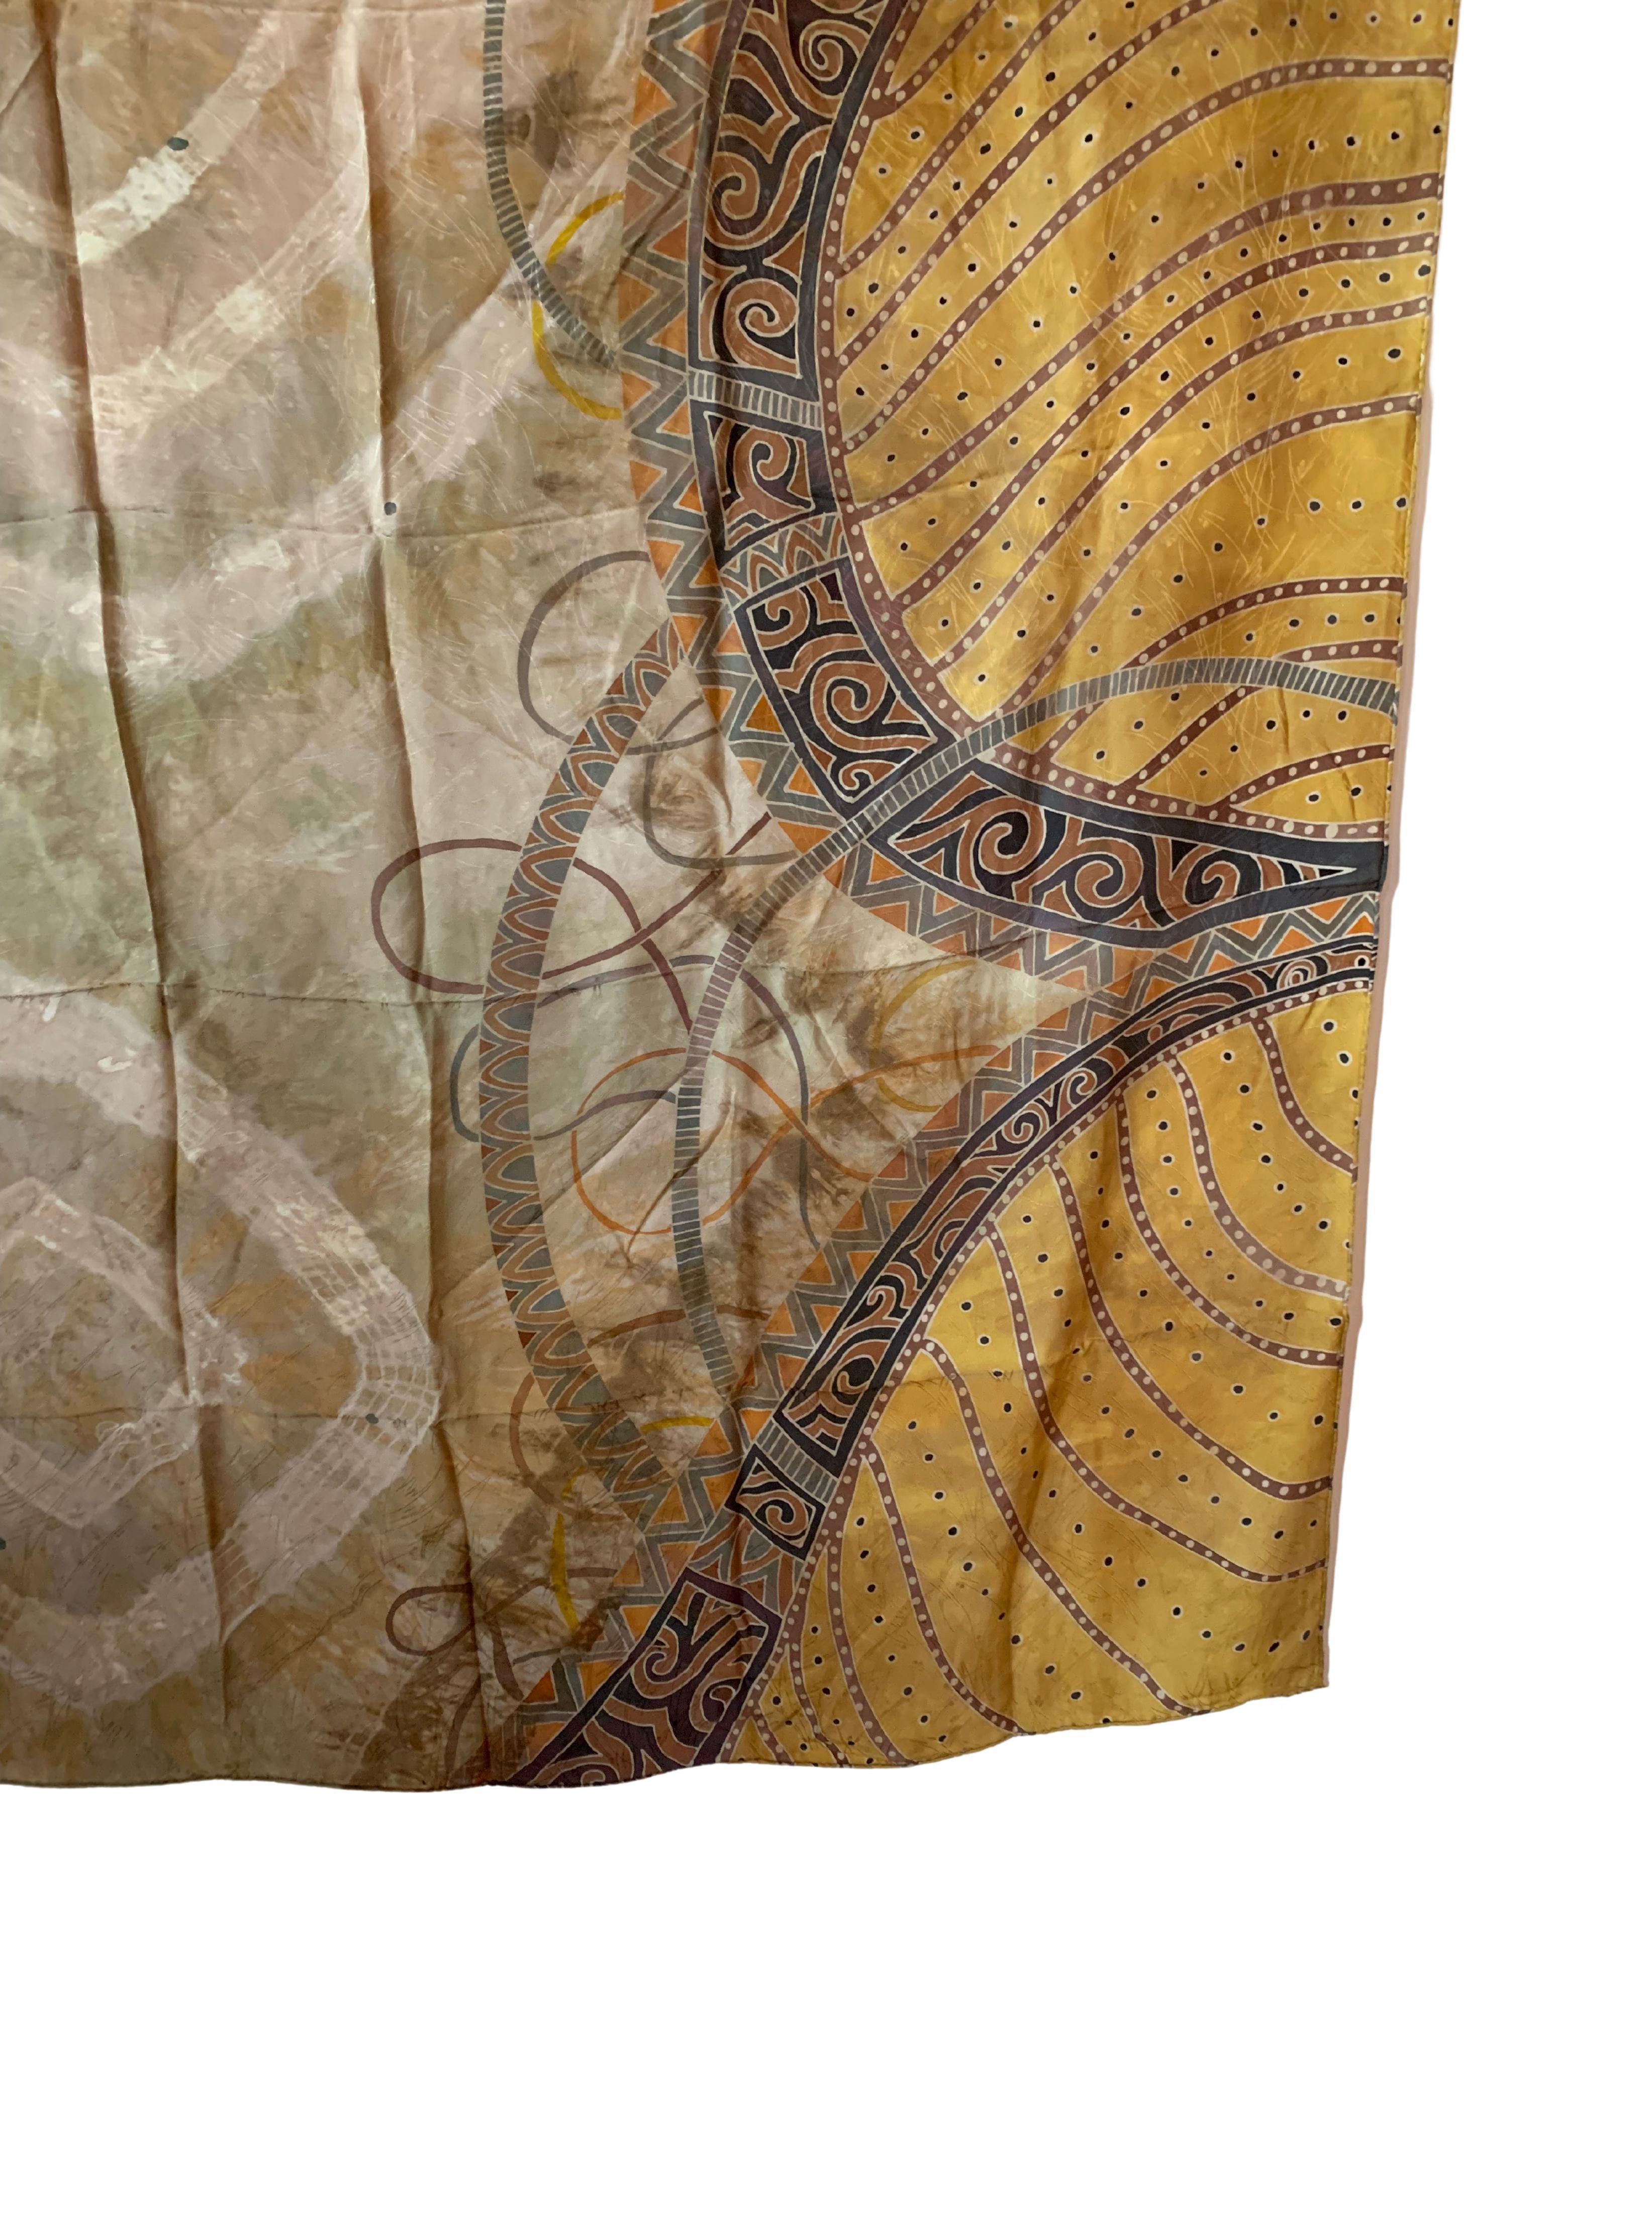 Hand-Crafted Shantung Silk Textile with Stunning Detailing For Sale 1